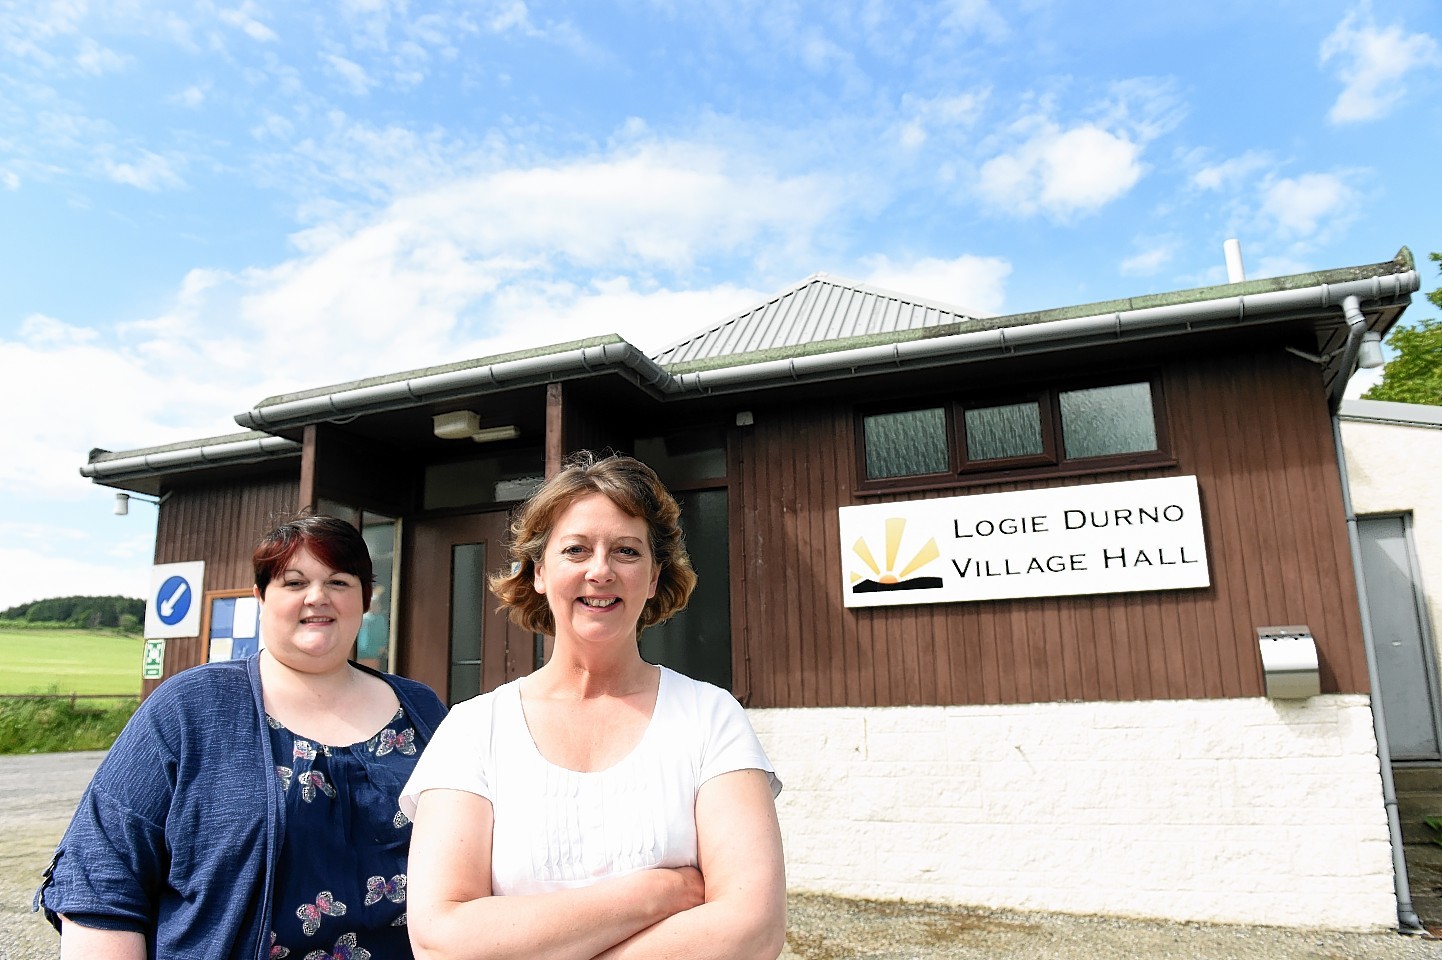 Renovation work has now started at Logie Durno Village Hall, thanks to the local community, who managed to secure £25,000 funding for the project